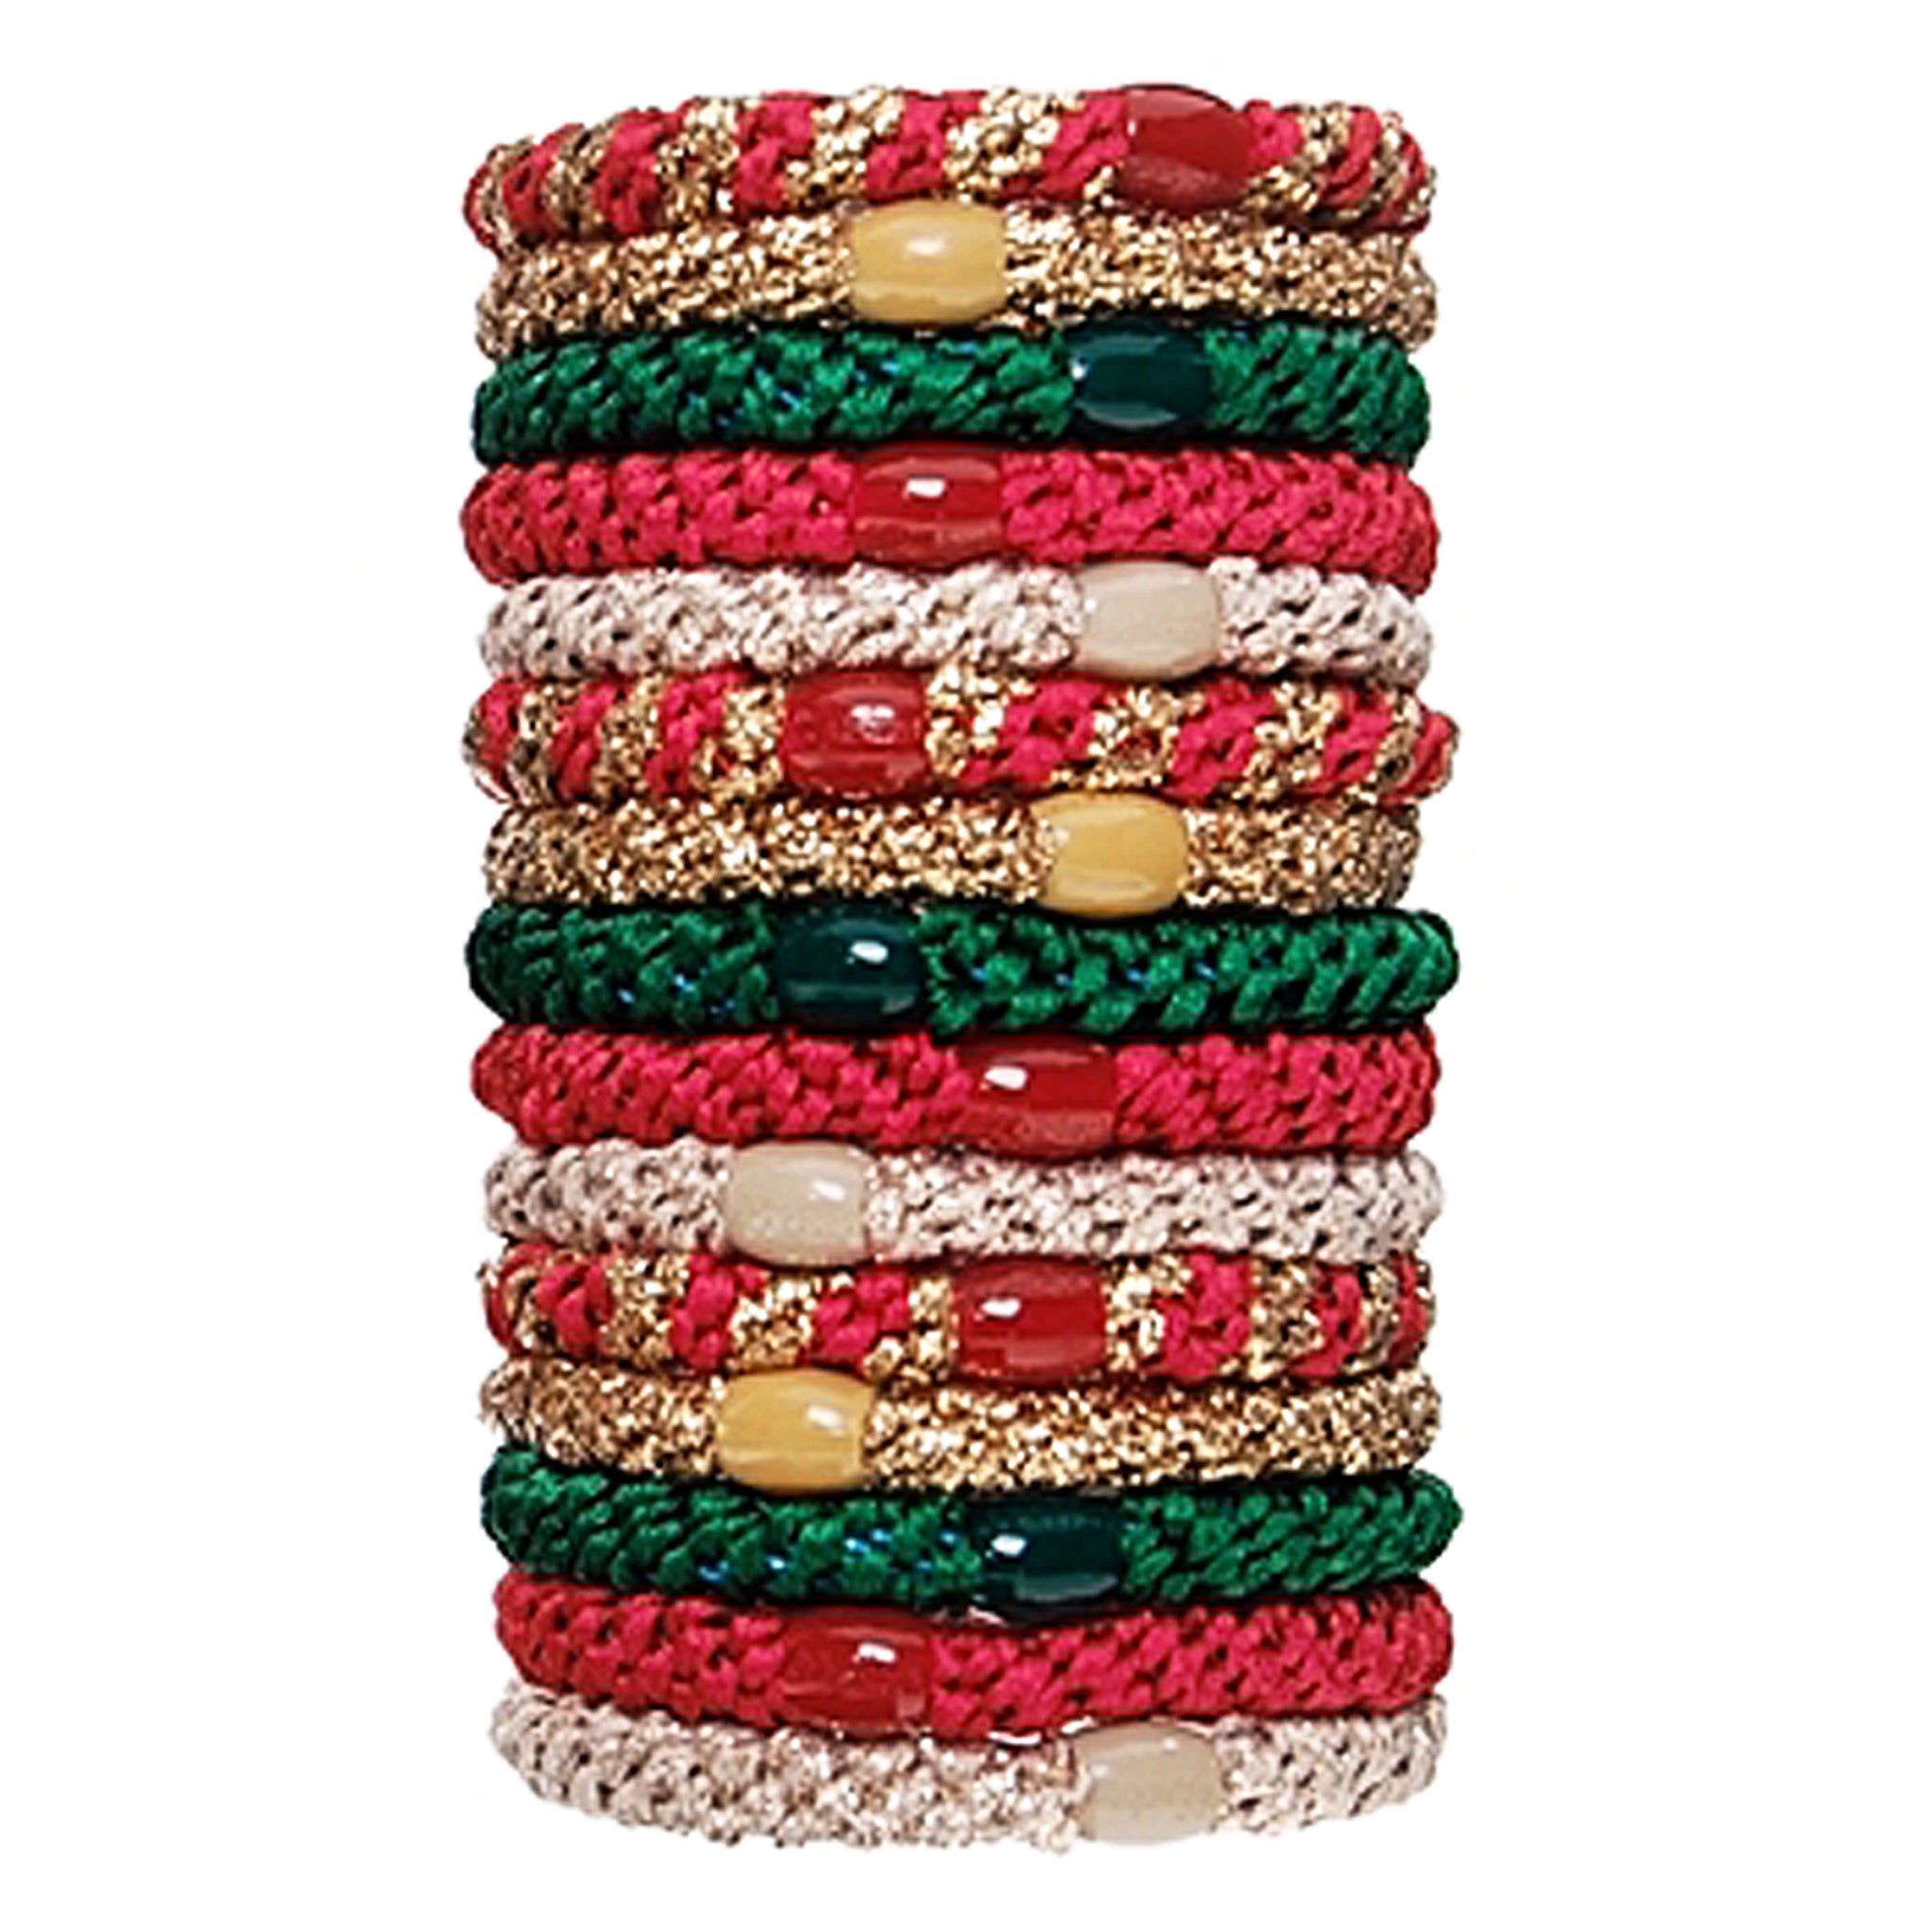 L. Erickson Grab and Go Pony Tube Hair Ties in Merry Red Green 15 Pack